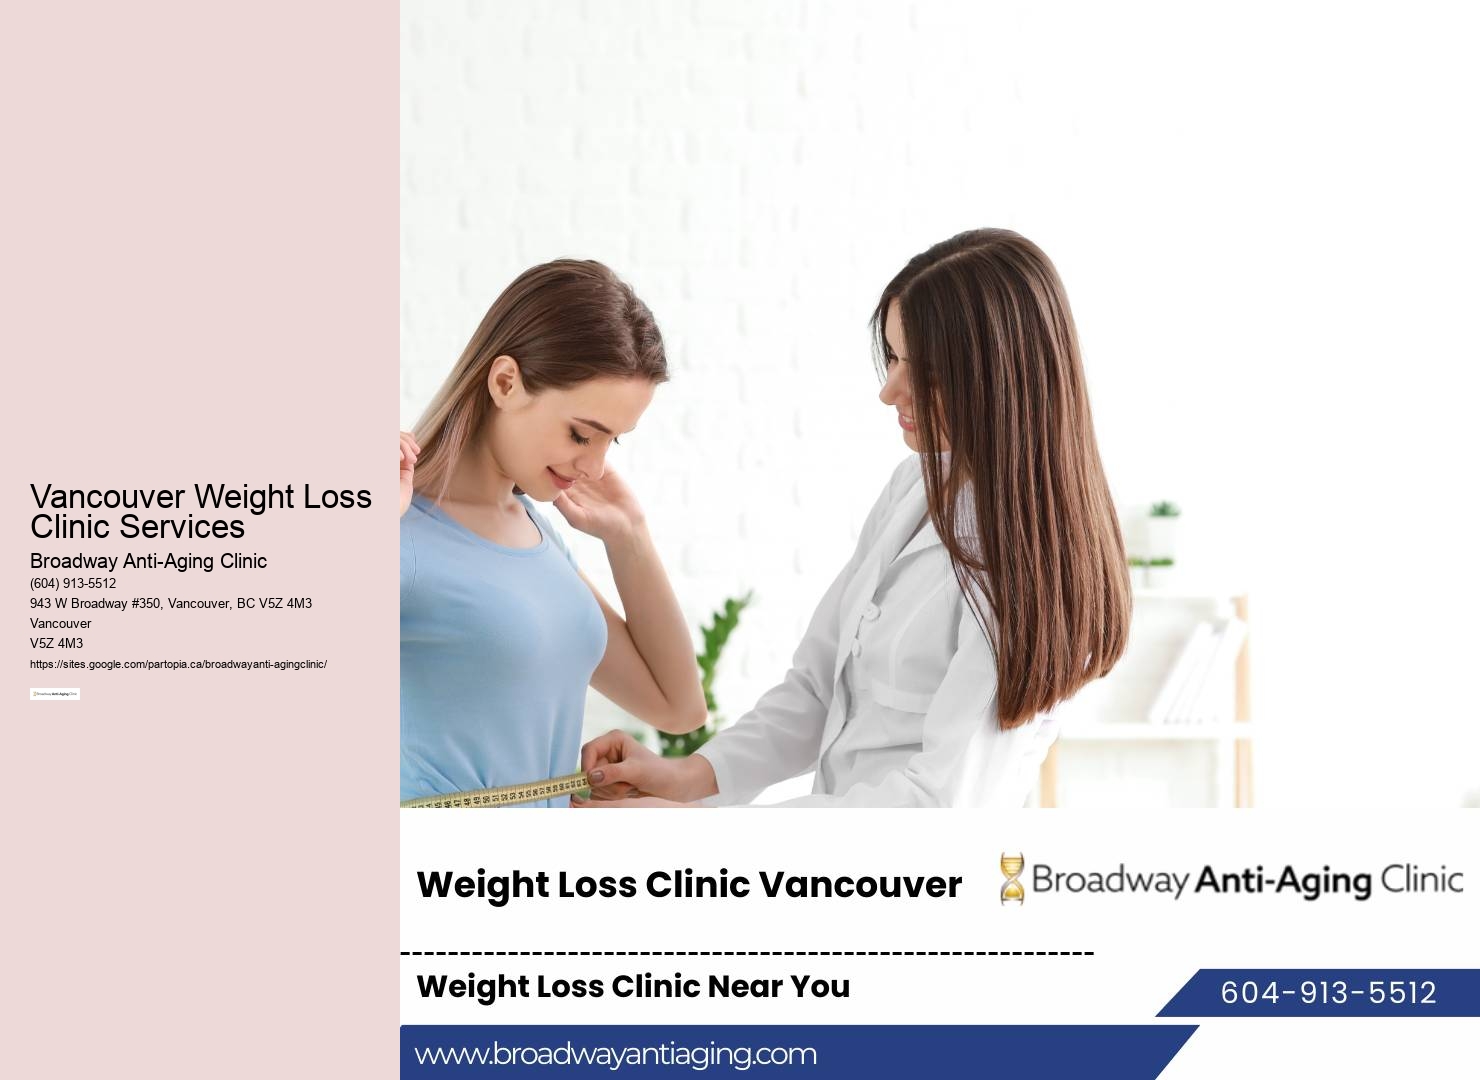 Vancouver Weight Loss Clinic Services